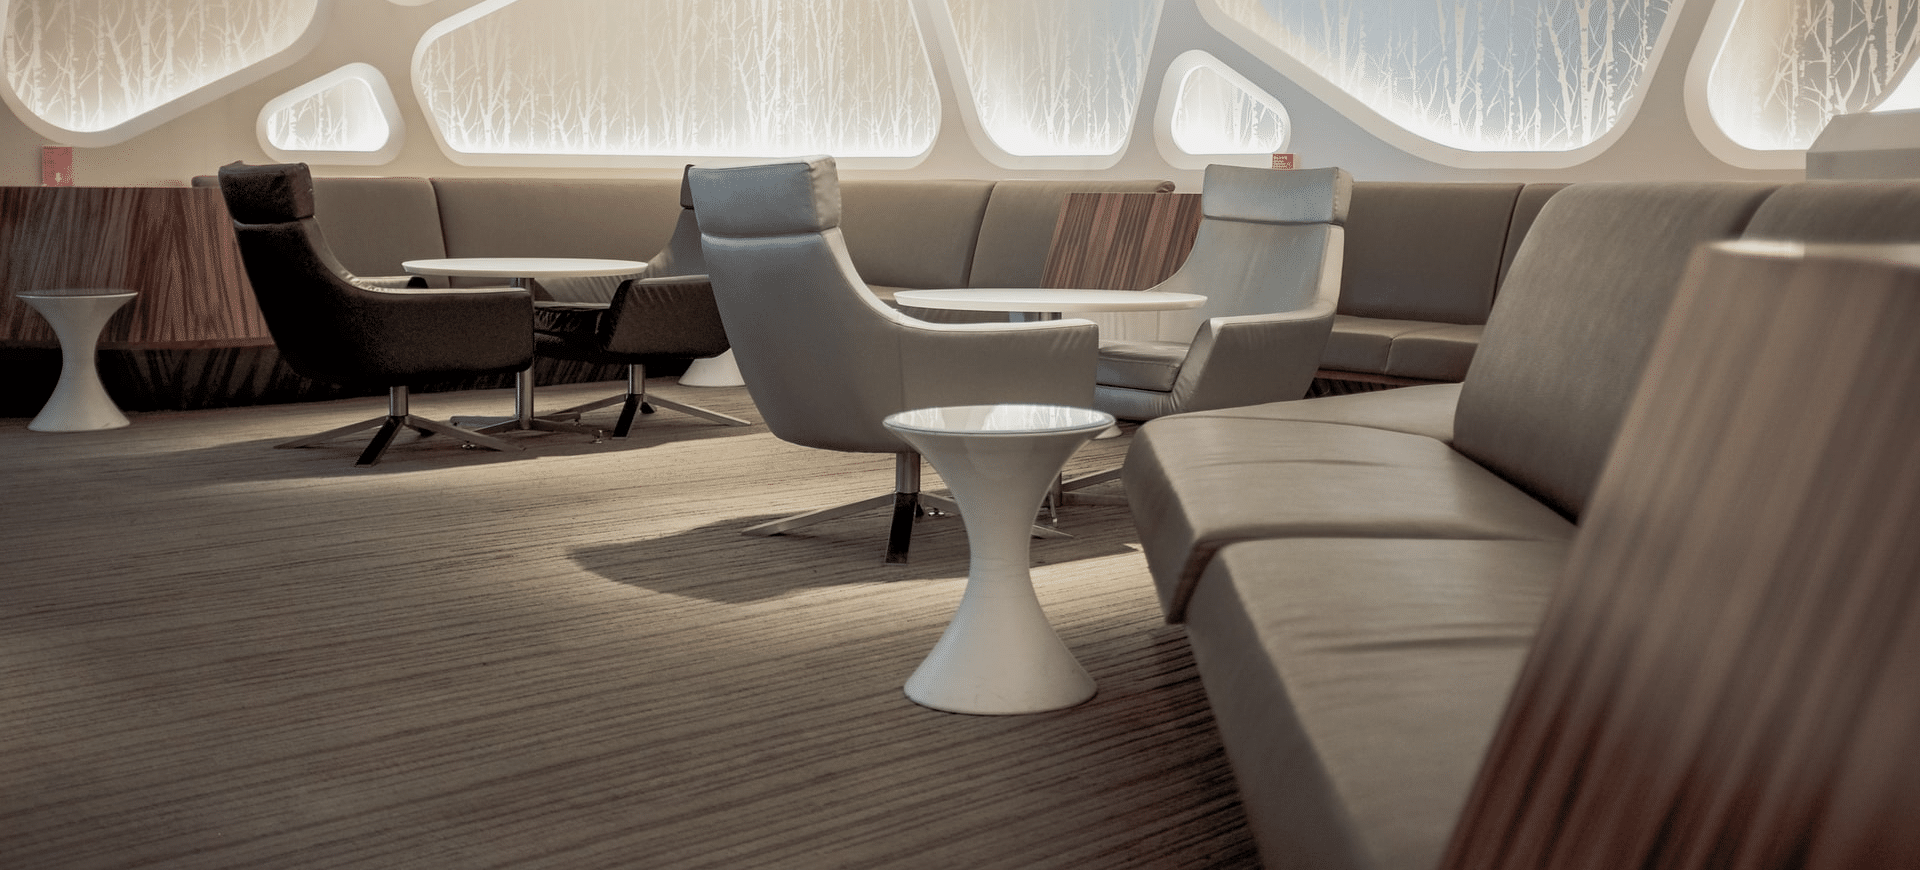 Once-upon-a-time airport lounge access alone was enough for frequent flyers, but they now expect a deluxe travel experience and innovation throughout every step of their journey.